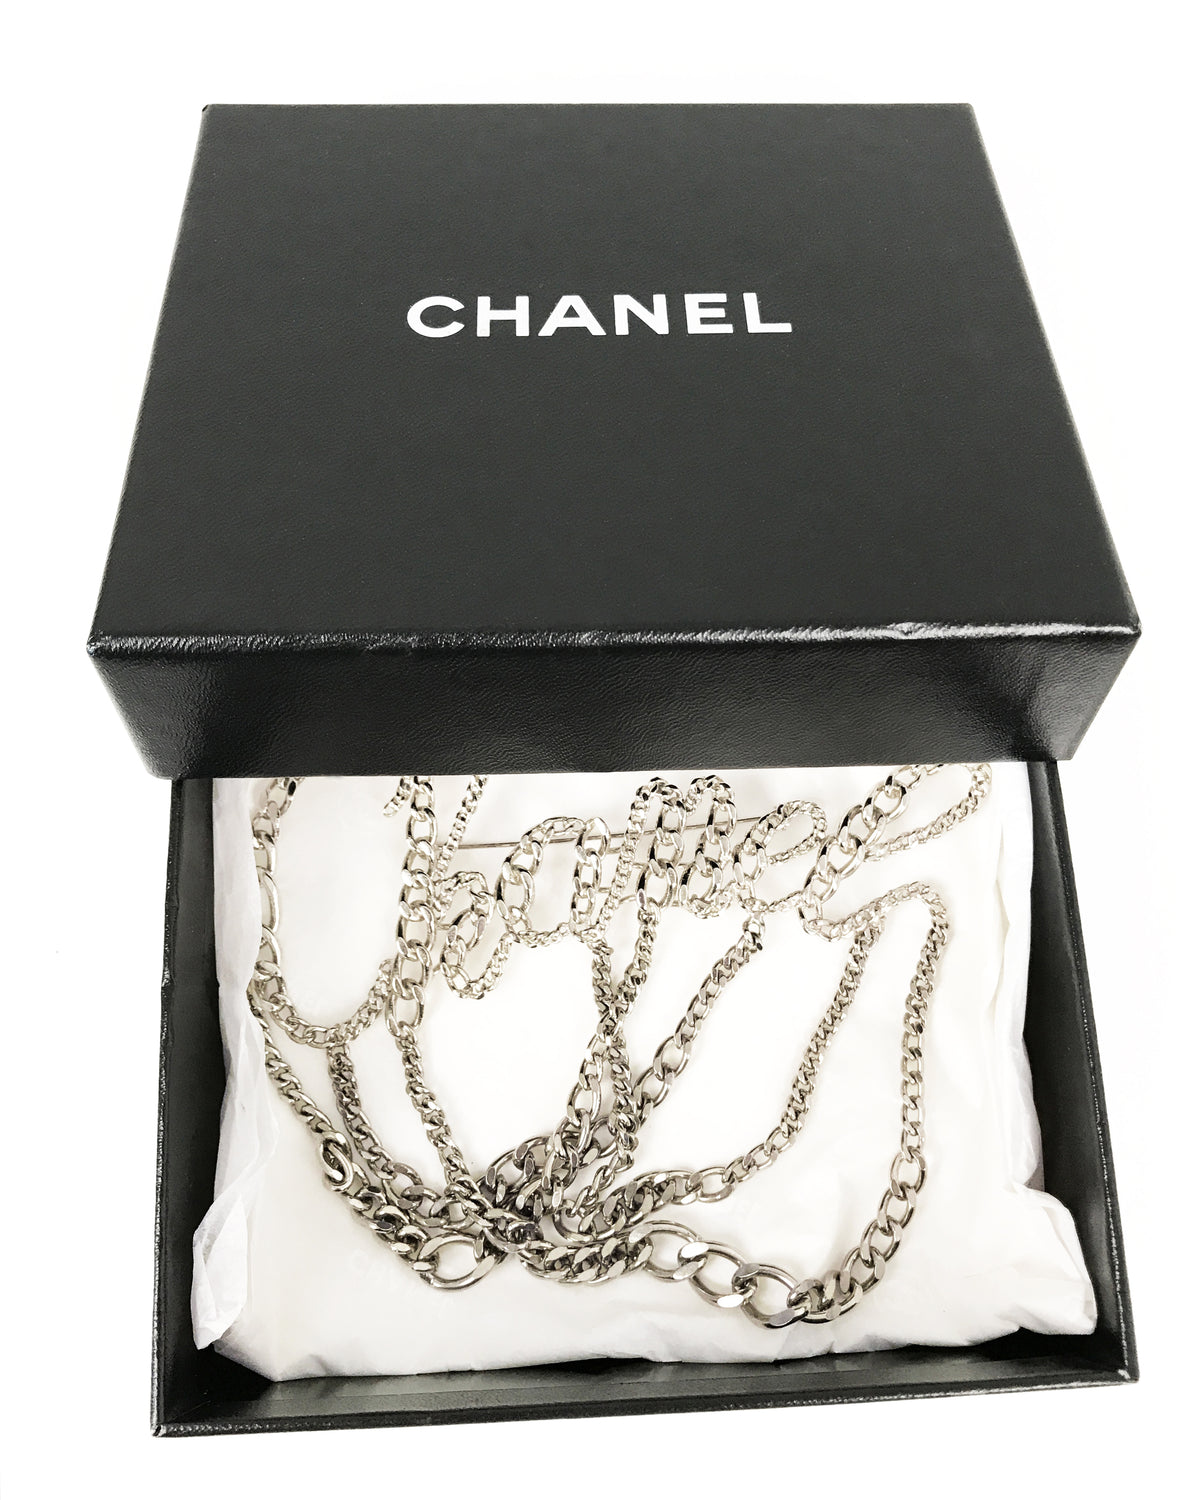 FRUIT Vintage Chanel Chain text logo brooch 2006 Karl Lagerfeld 